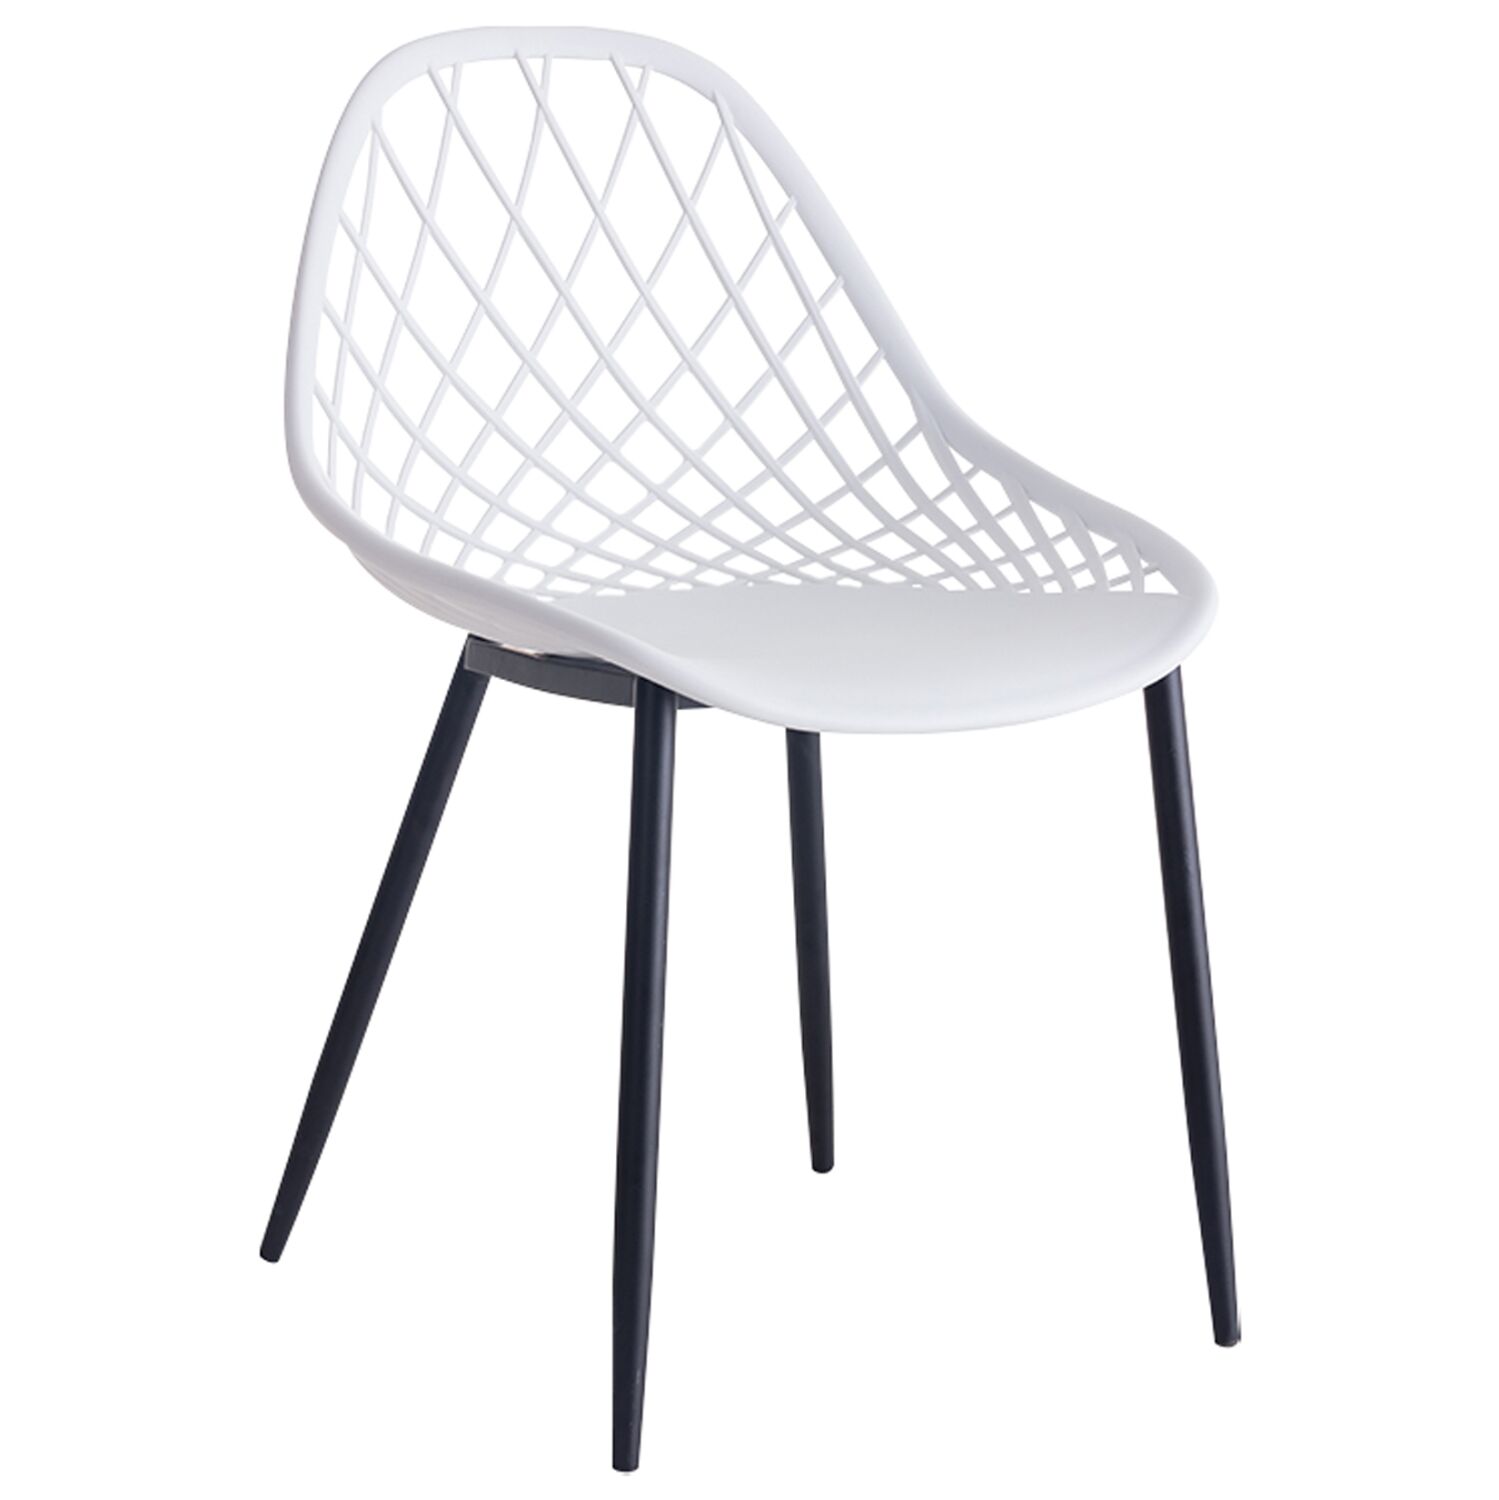 CHAIR POLYPROPYLENE HM9524.01 IN WHITE COLOR WITH BLACK METAL LEGS 52x53x82Hcm.